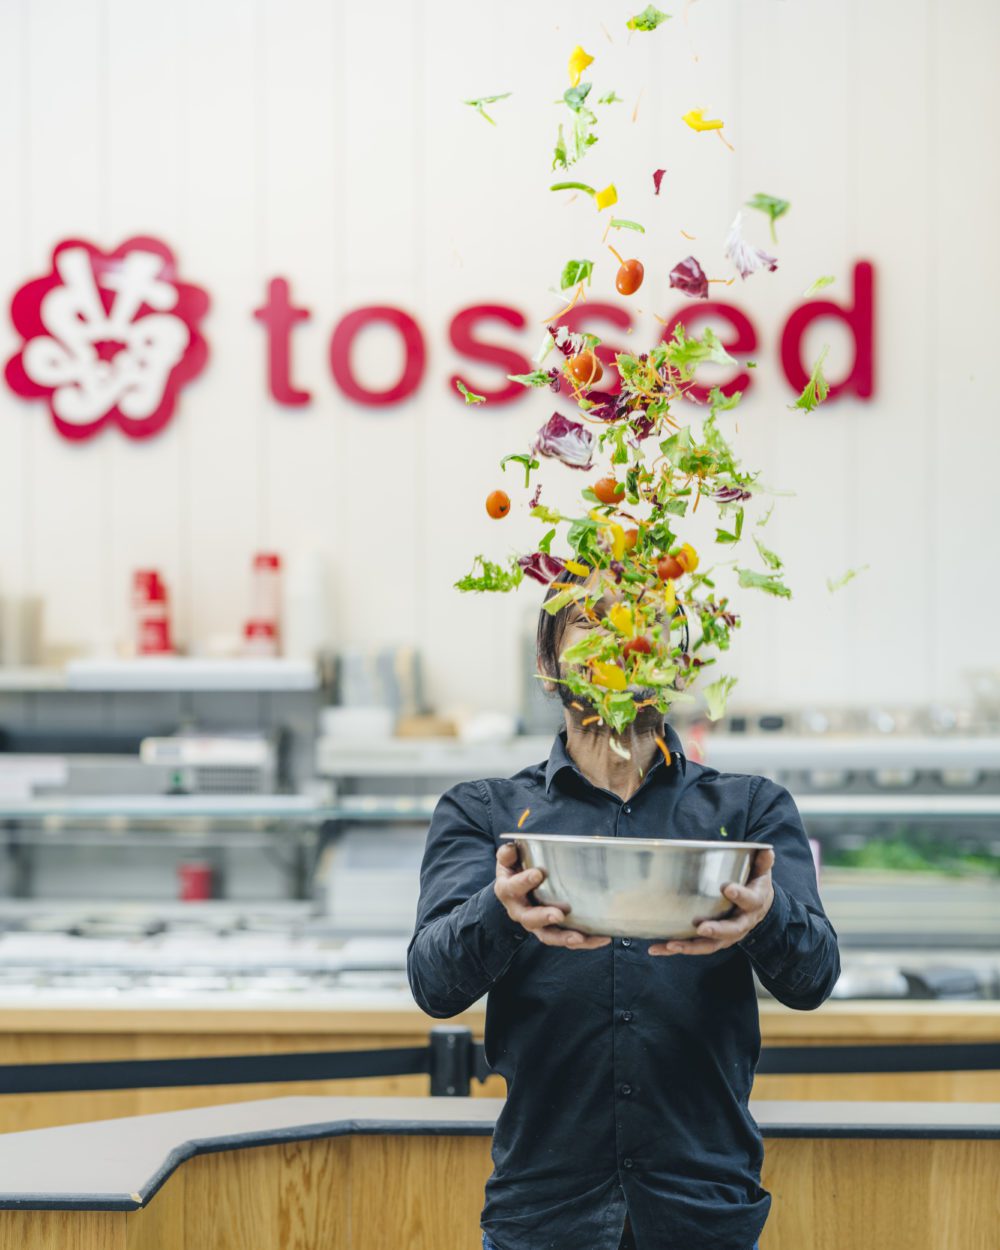 A salad being tossed into the air in front of a Tossed logo!